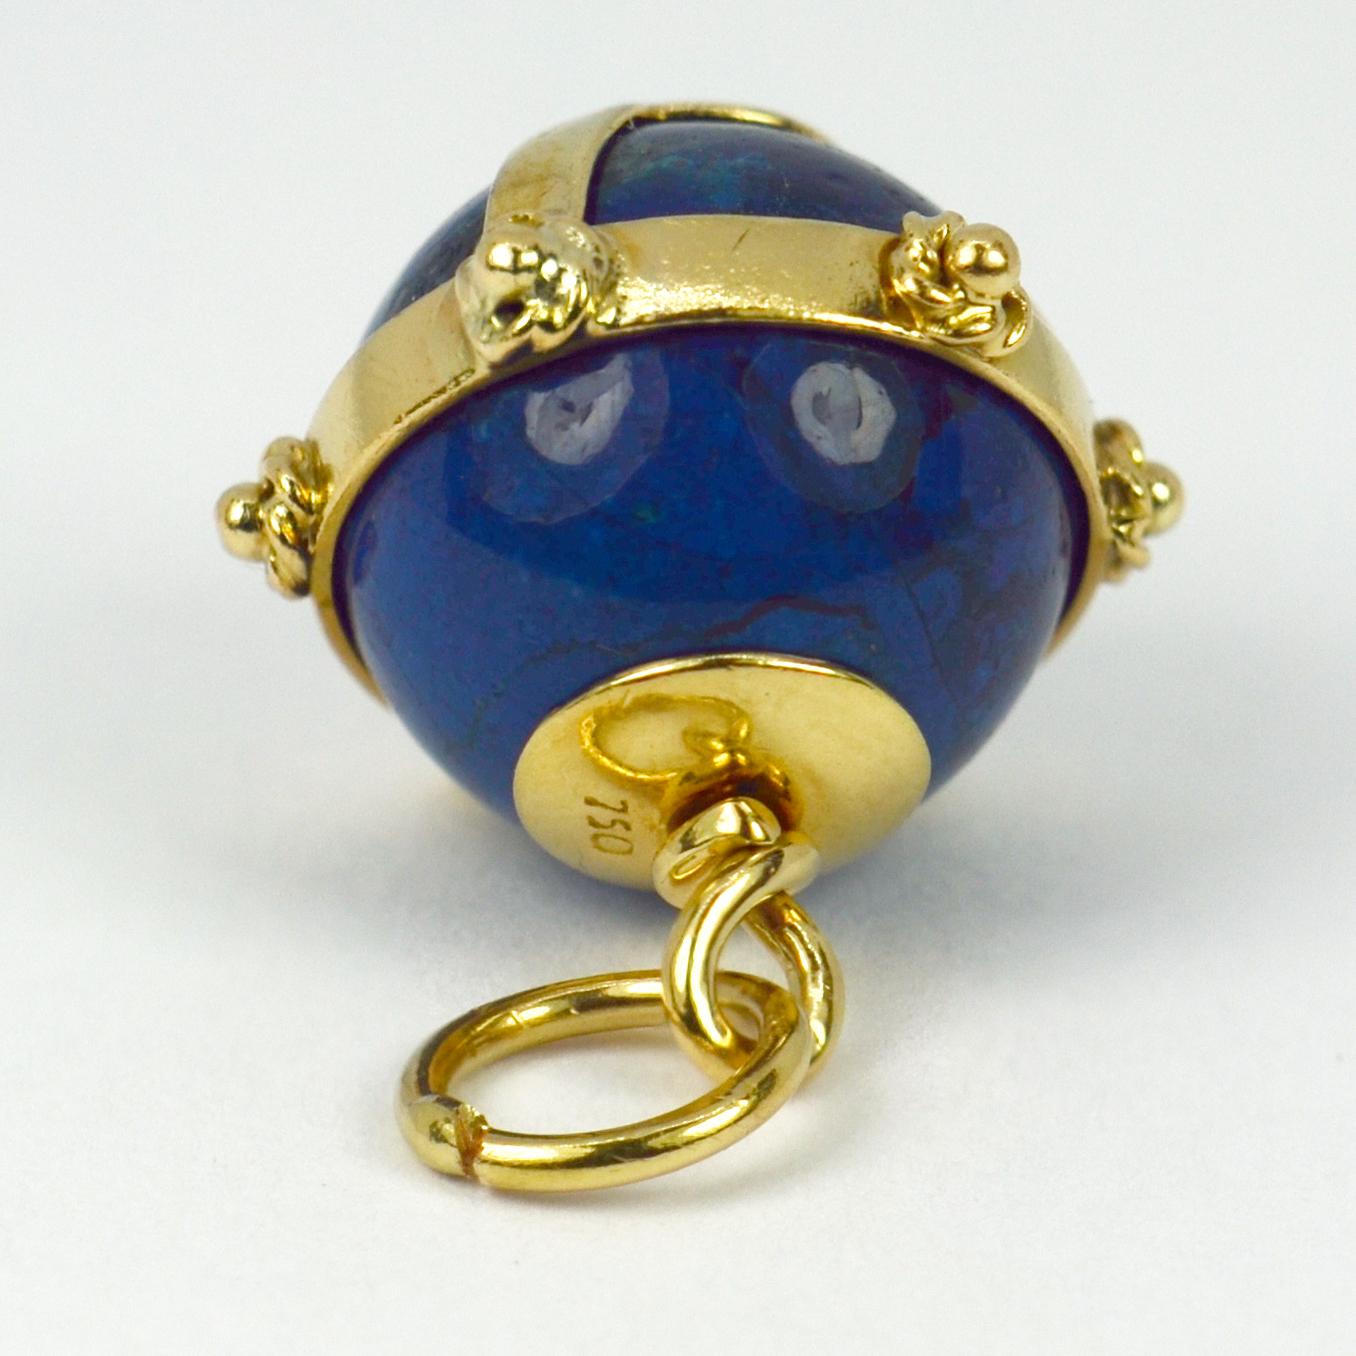 An 18 karat (18K) yellow gold and Swiss lapis charm pendant designed as a sphere with gold detailing. Stamped with the owl punch mark for 18 karat gold and French import to the jump ring.

Dimensions: 2 x 1.8 x 1.8 cm
Weight: 5.64 grams
